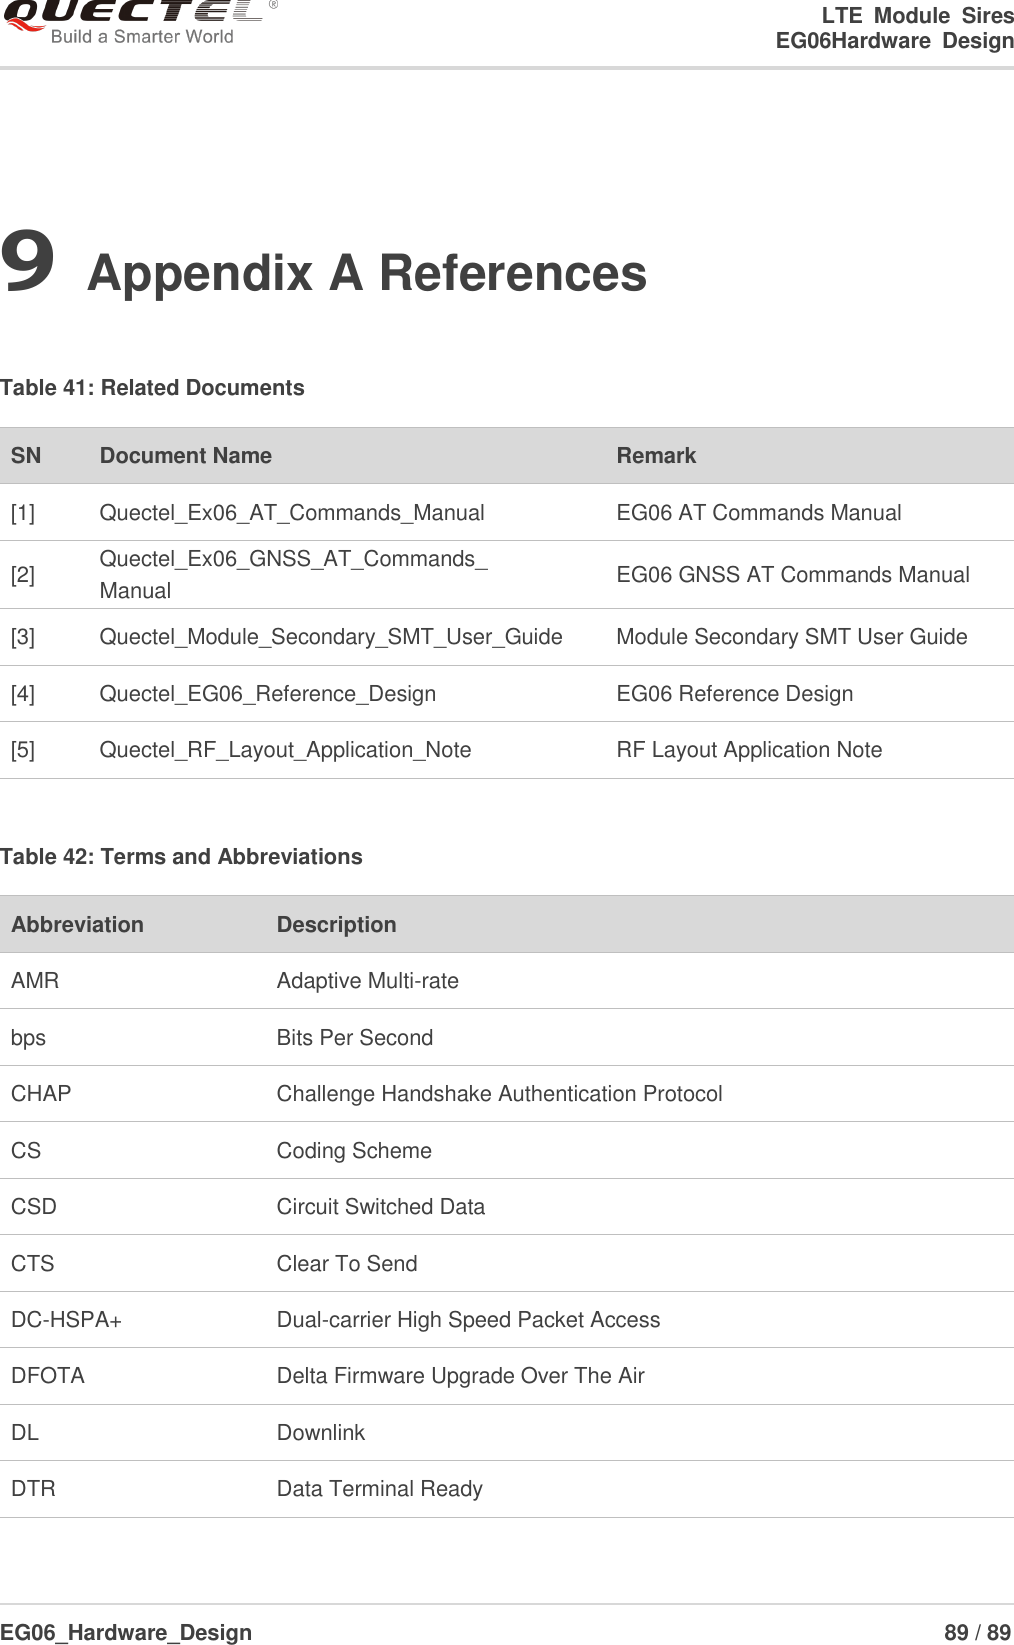 LTE  Module  Sires                                                                 EG06Hardware  Design  EG06_Hardware_Design                                                               89 / 89    9 Appendix A References  Table 41: Related Documents  Table 42: Terms and Abbreviations SN Document Name Remark [1] Quectel_Ex06_AT_Commands_Manual EG06 AT Commands Manual [2] Quectel_Ex06_GNSS_AT_Commands_ Manual EG06 GNSS AT Commands Manual [3] Quectel_Module_Secondary_SMT_User_Guide Module Secondary SMT User Guide [4] Quectel_EG06_Reference_Design EG06 Reference Design [5] Quectel_RF_Layout_Application_Note RF Layout Application Note Abbreviation Description AMR Adaptive Multi-rate bps Bits Per Second CHAP   Challenge Handshake Authentication Protocol CS   Coding Scheme CSD   Circuit Switched Data CTS   Clear To Send DC-HSPA+ Dual-carrier High Speed Packet Access DFOTA Delta Firmware Upgrade Over The Air DL Downlink DTR   Data Terminal Ready 